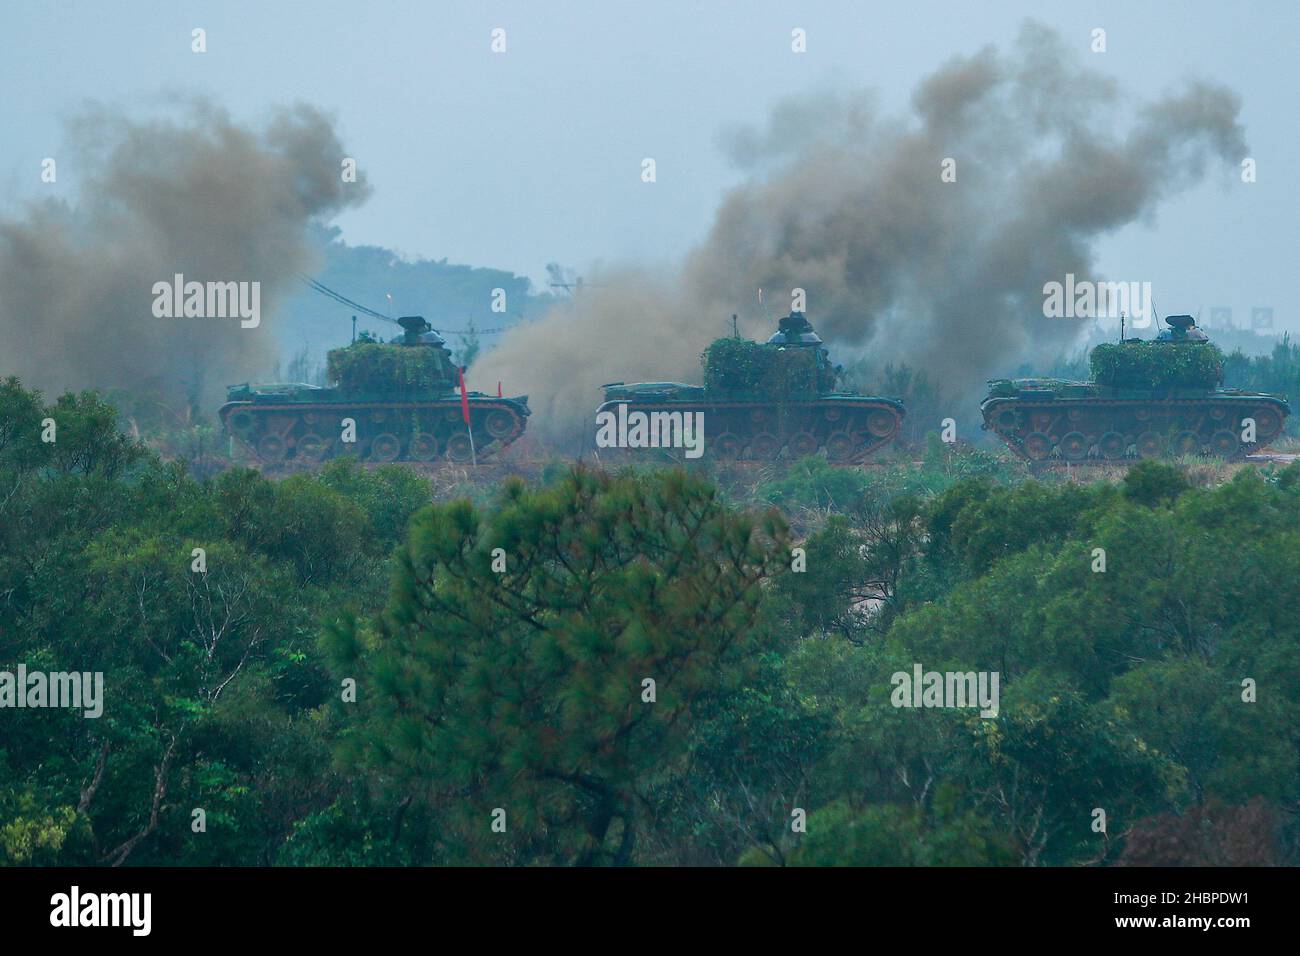 Hsinchu, Taipei, Taiwan. 21st Dec, 2021. M60-A3 tanks move to a spot during a live ammunition military drill at an undisclosed location, amid rising tensions with China. Taiwan has been facing intensifying military threats from China including Chinese PLA warplanes sent to cruise around the island, while the US has been offering more arm sales to Taiwan. (Credit Image: © Daniel Ceng Shou-Yi/ZUMA Press Wire) Stock Photo